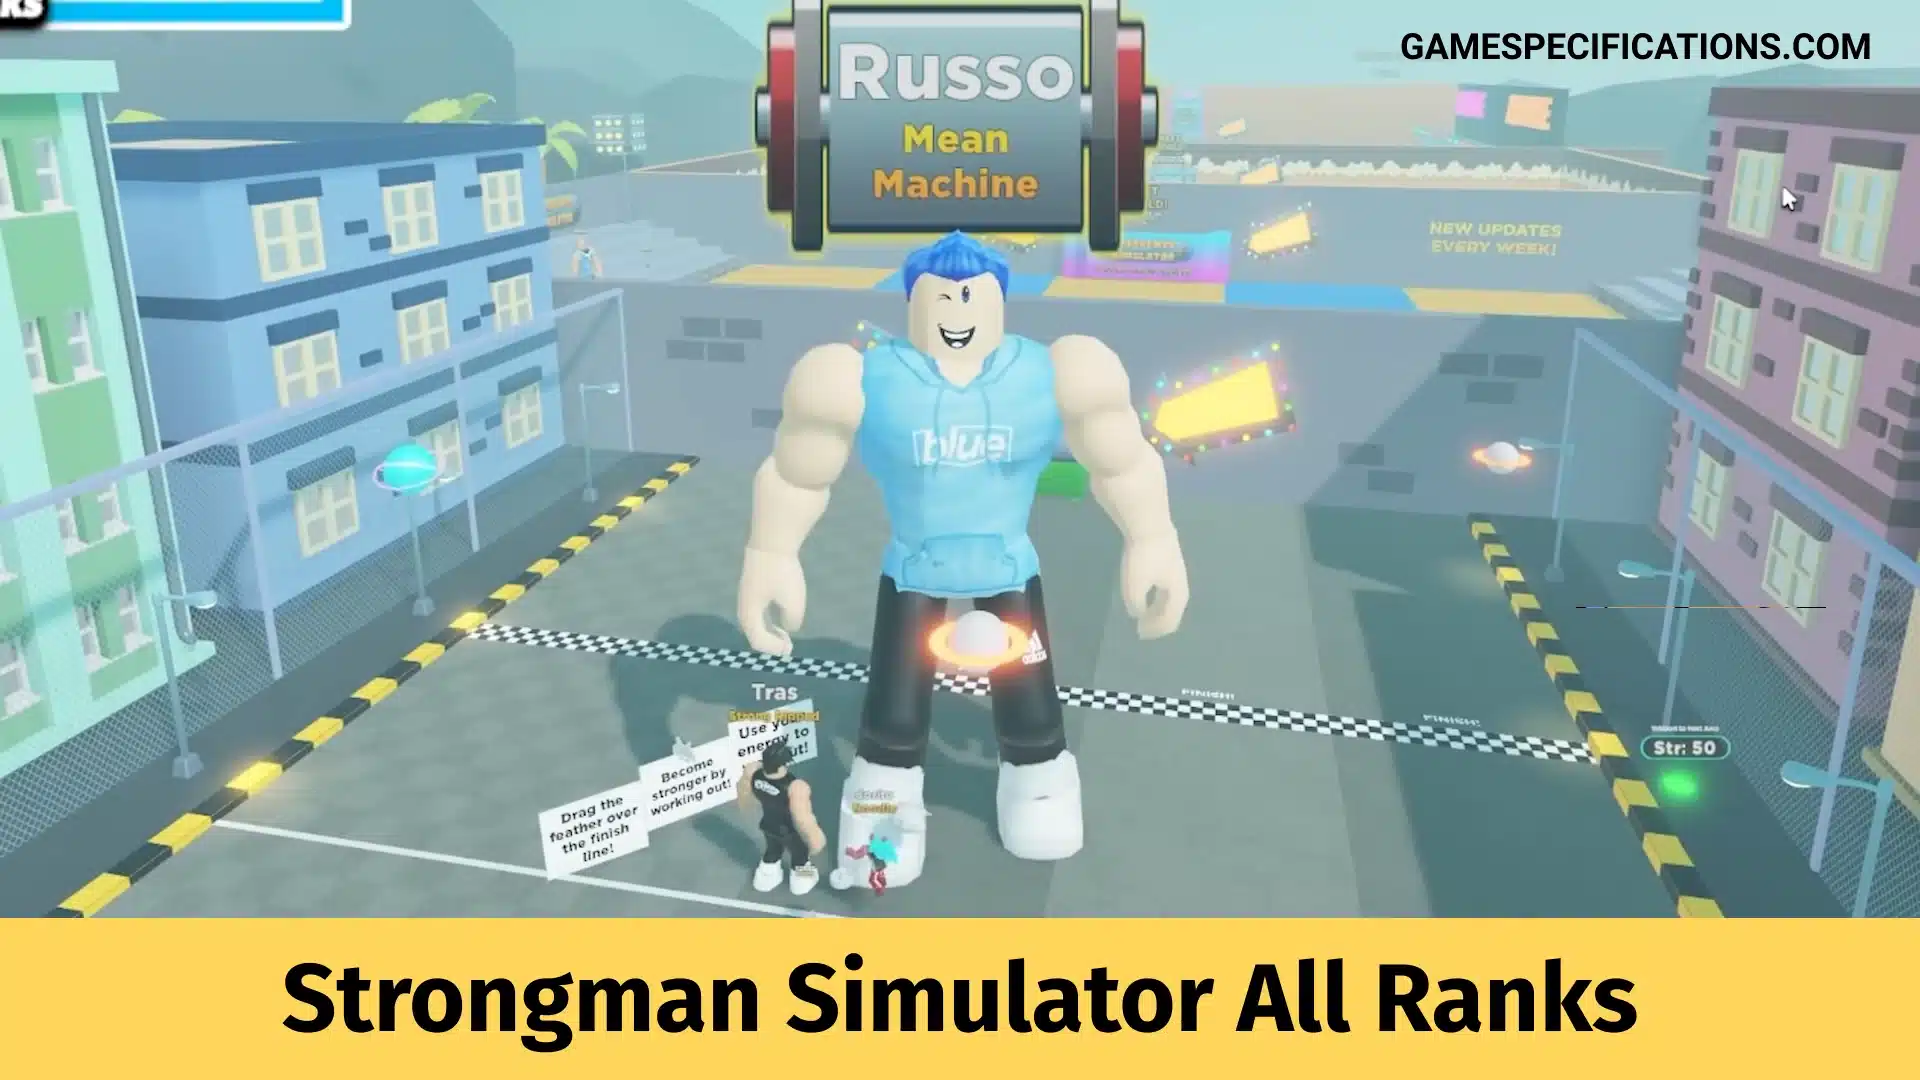 Strongman Simulator All Ranks - Game Specifications